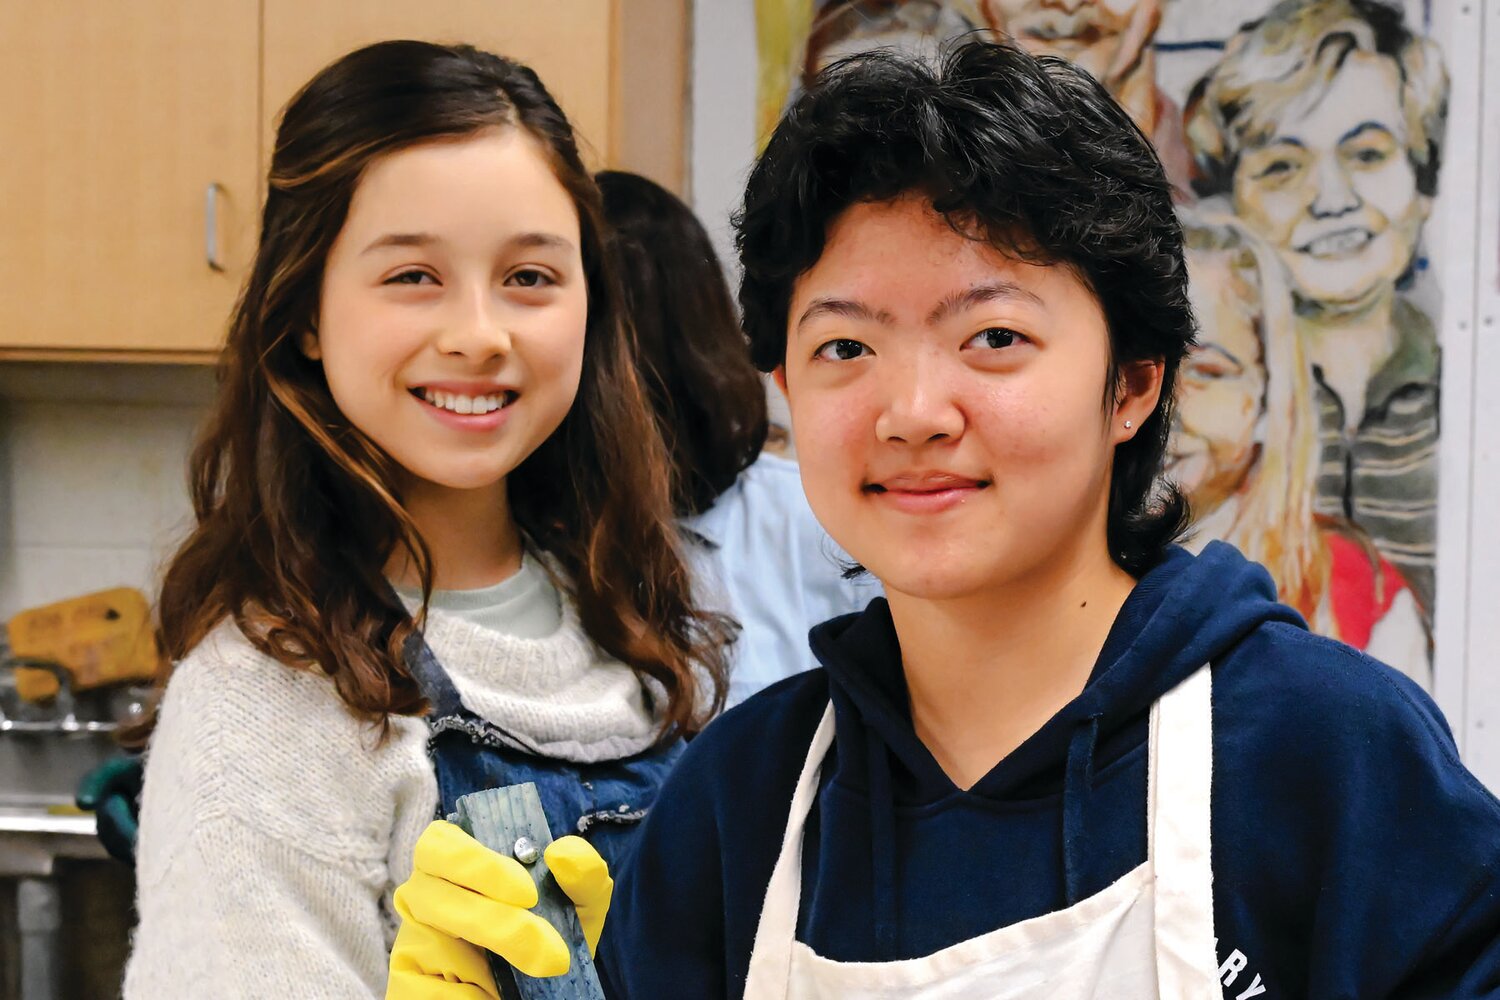 Solebury School students Penelope Wu and August Chen.